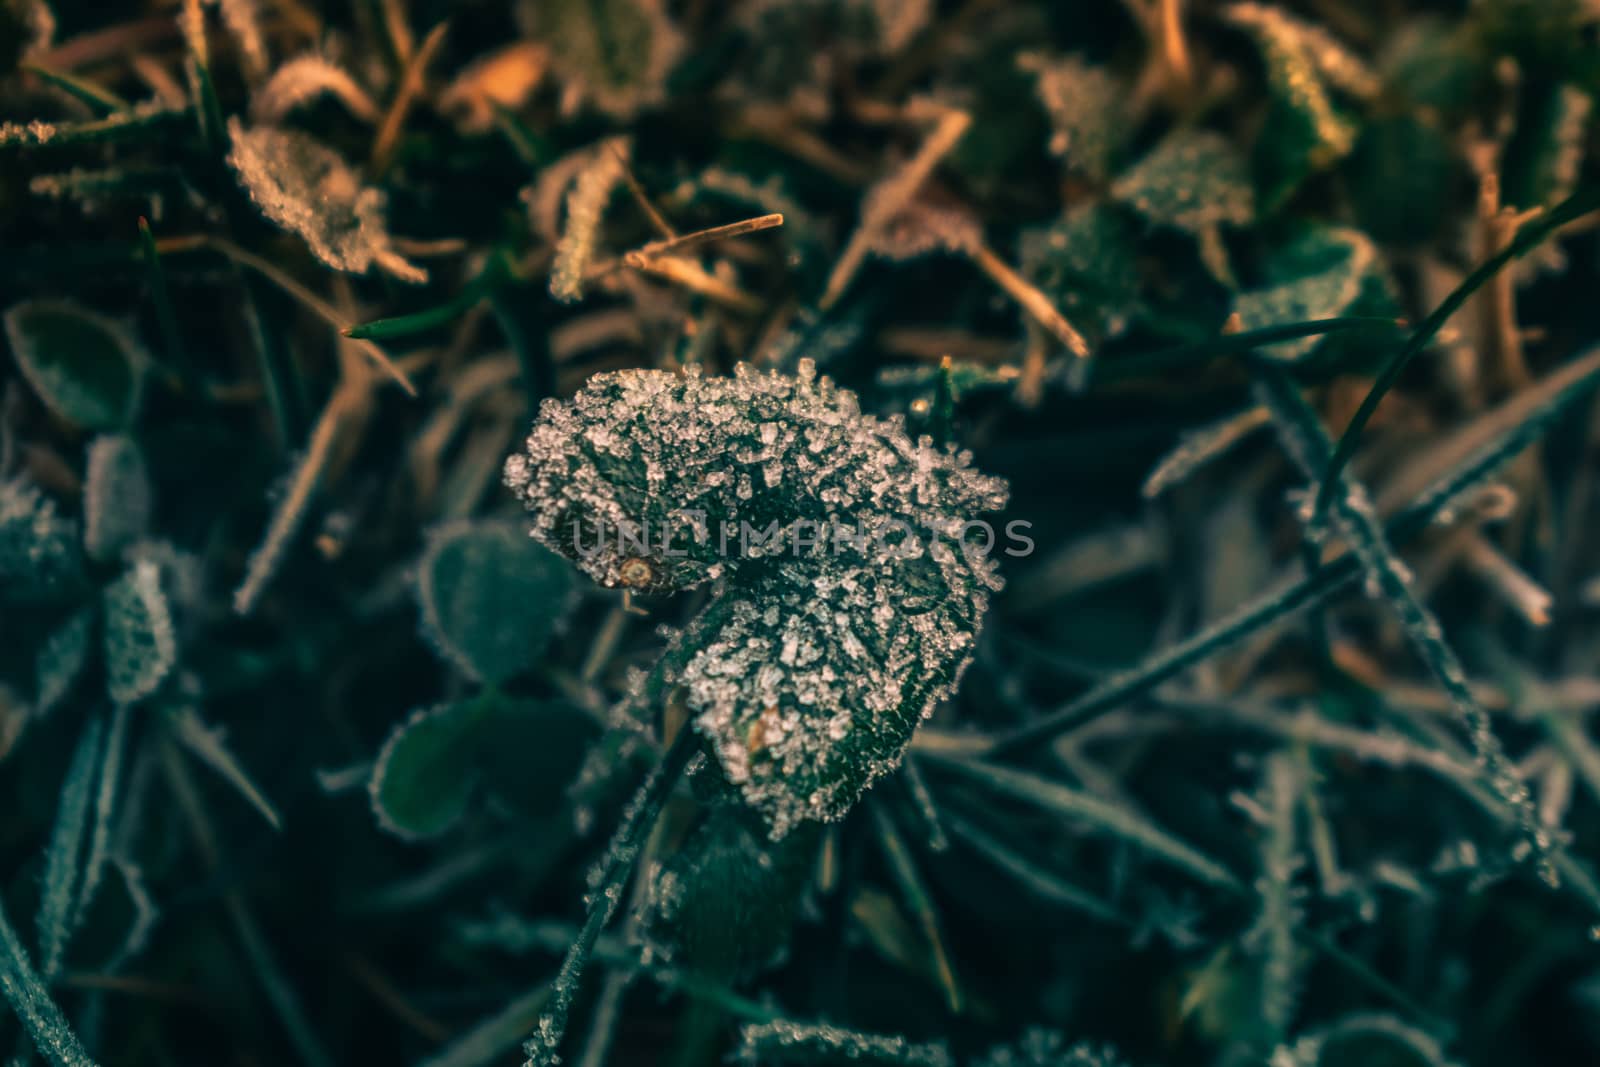 A Close Up of a Small Frost Covered Leaf by bju12290